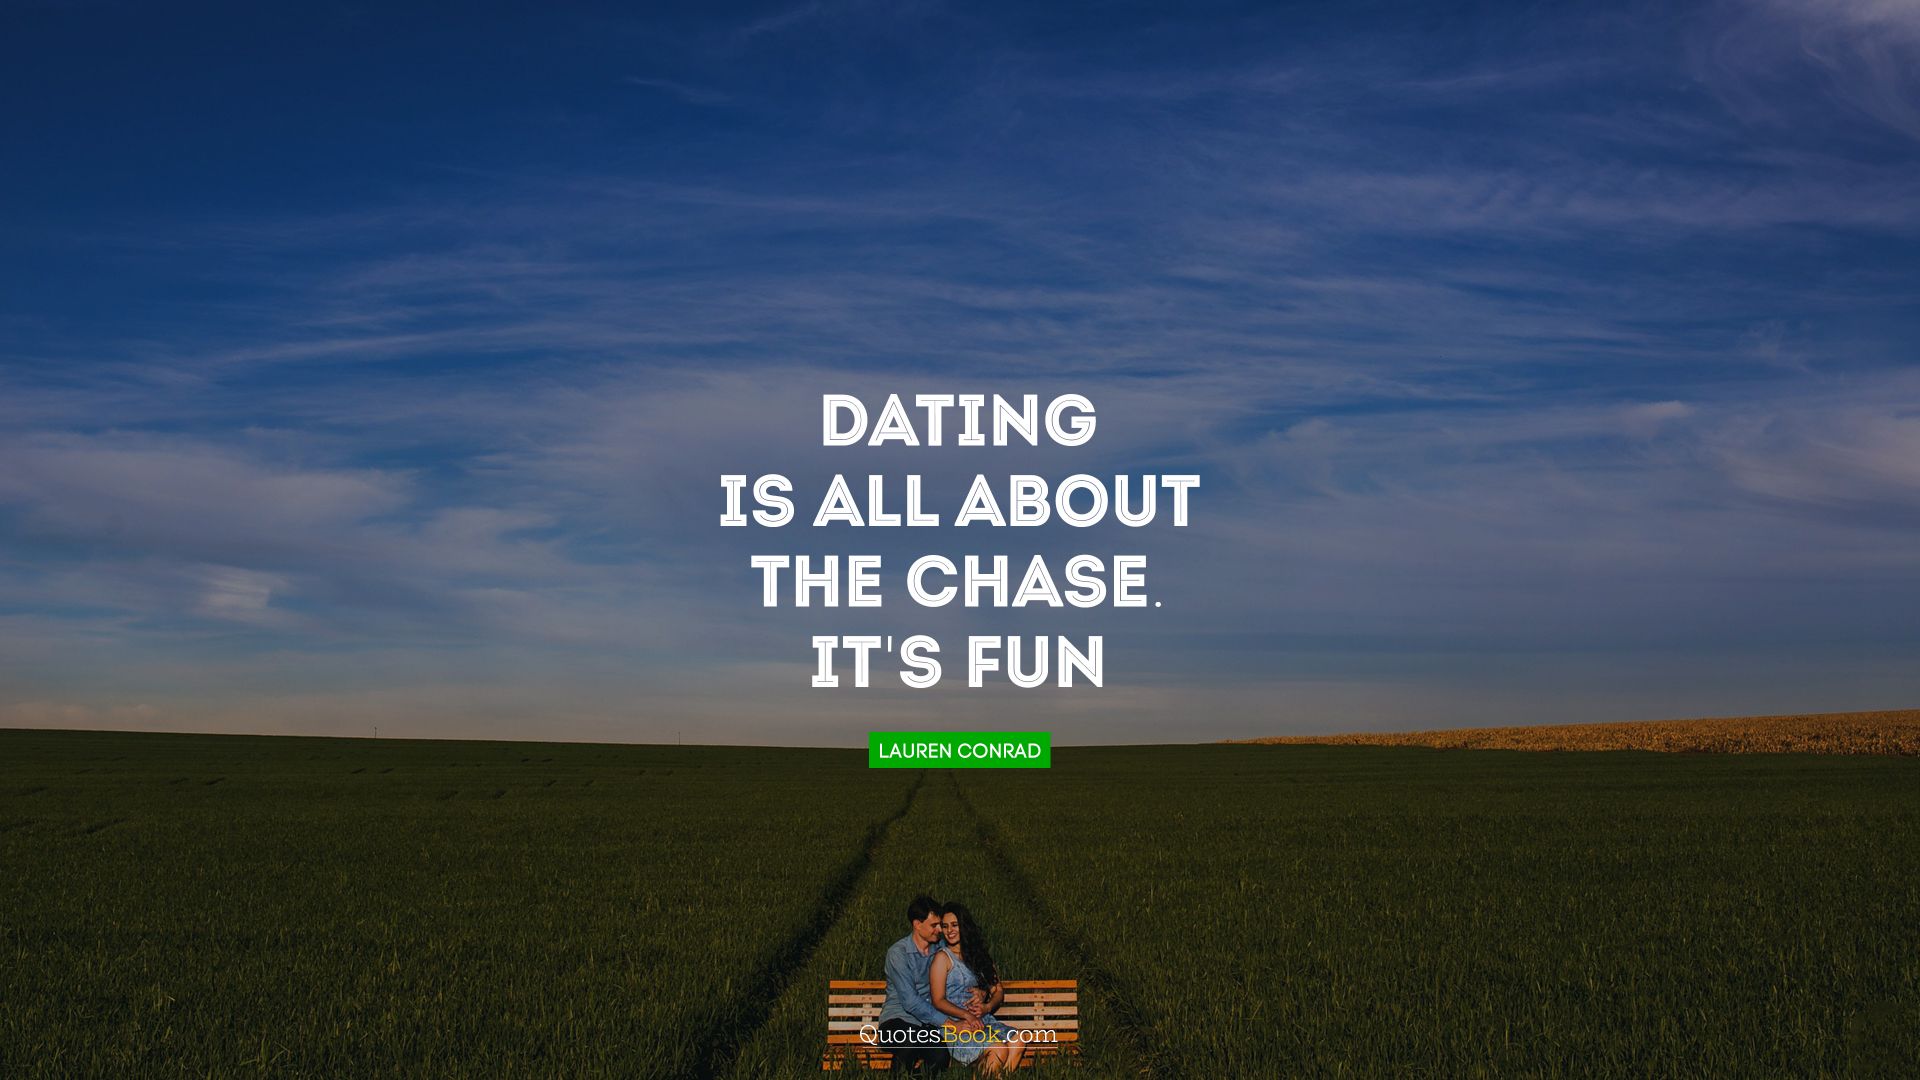 Dating is all about the chase. It's fun!. - Quote by Lauren Conrad